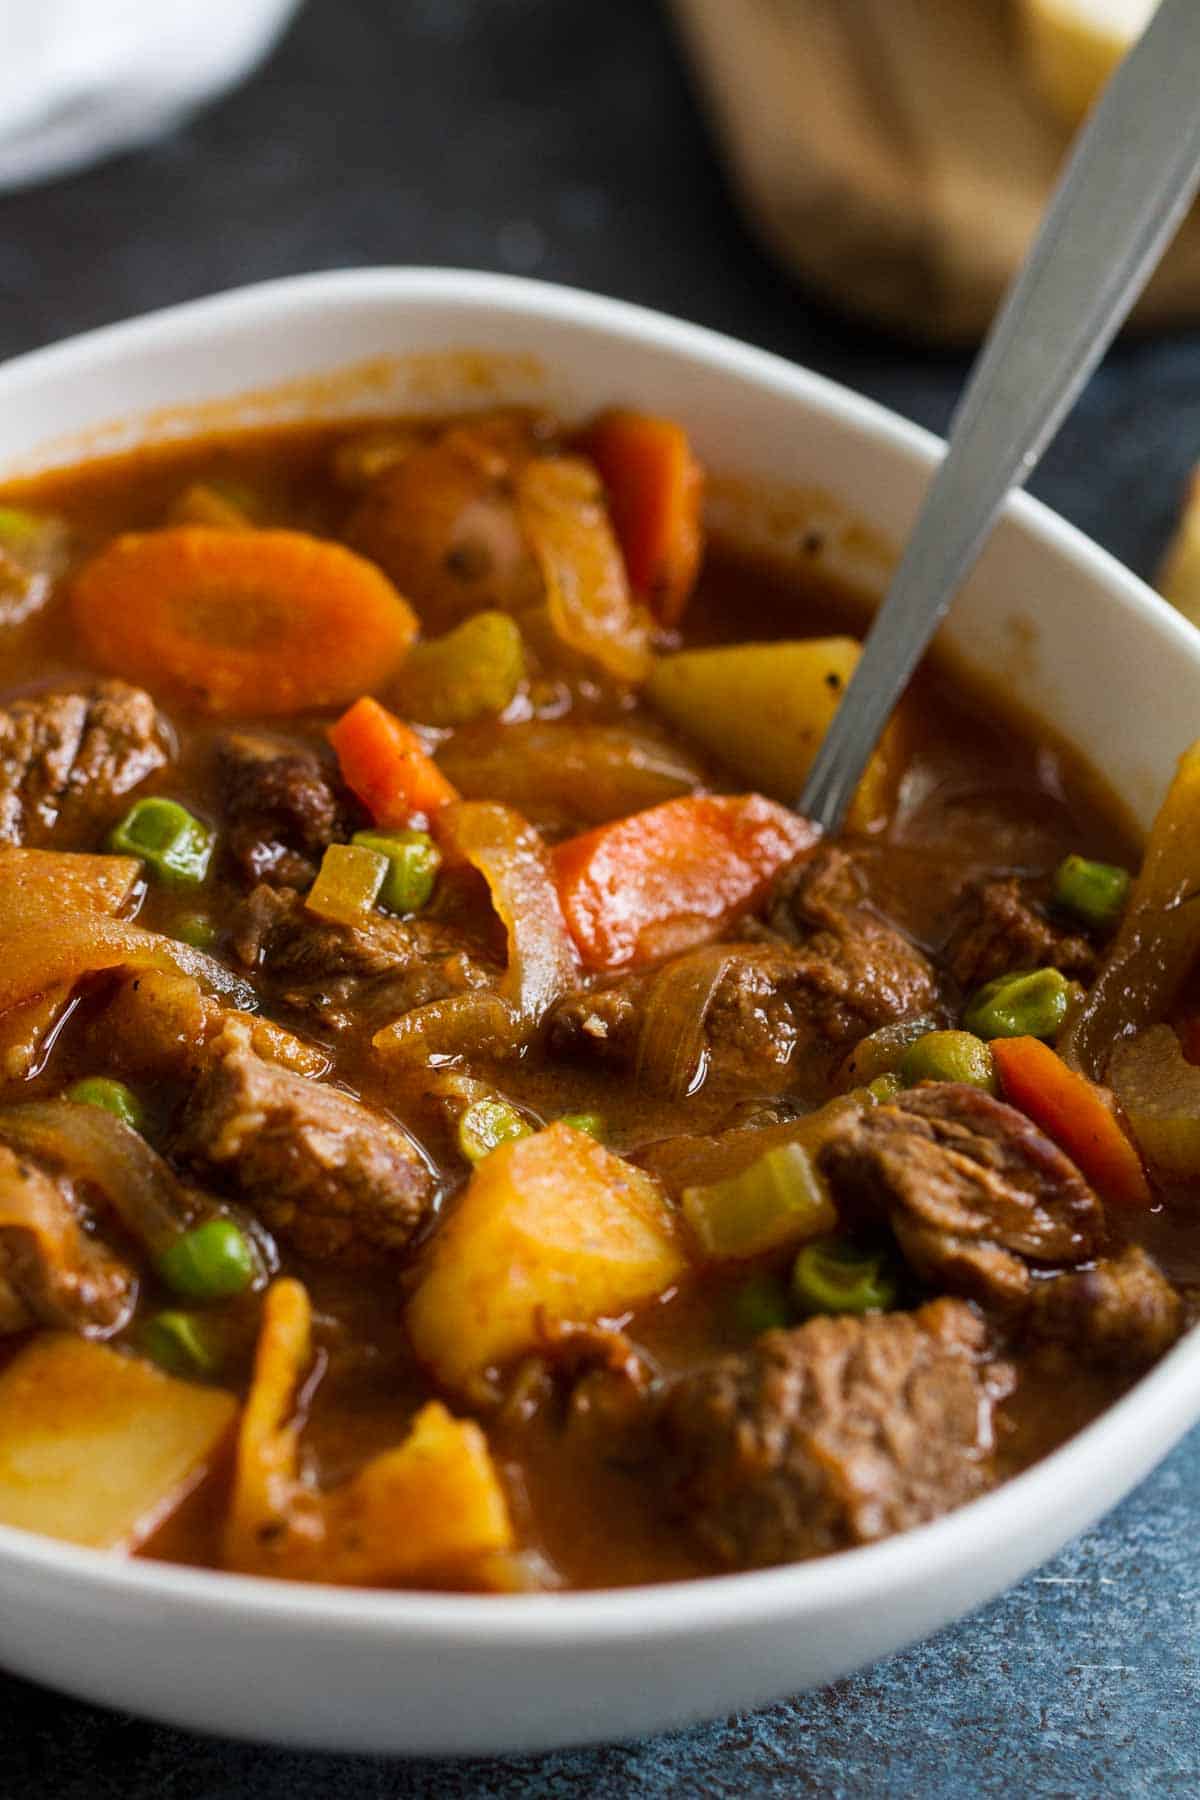 Best Classic Homemade Beef Stew Recipe - Taste and Tell